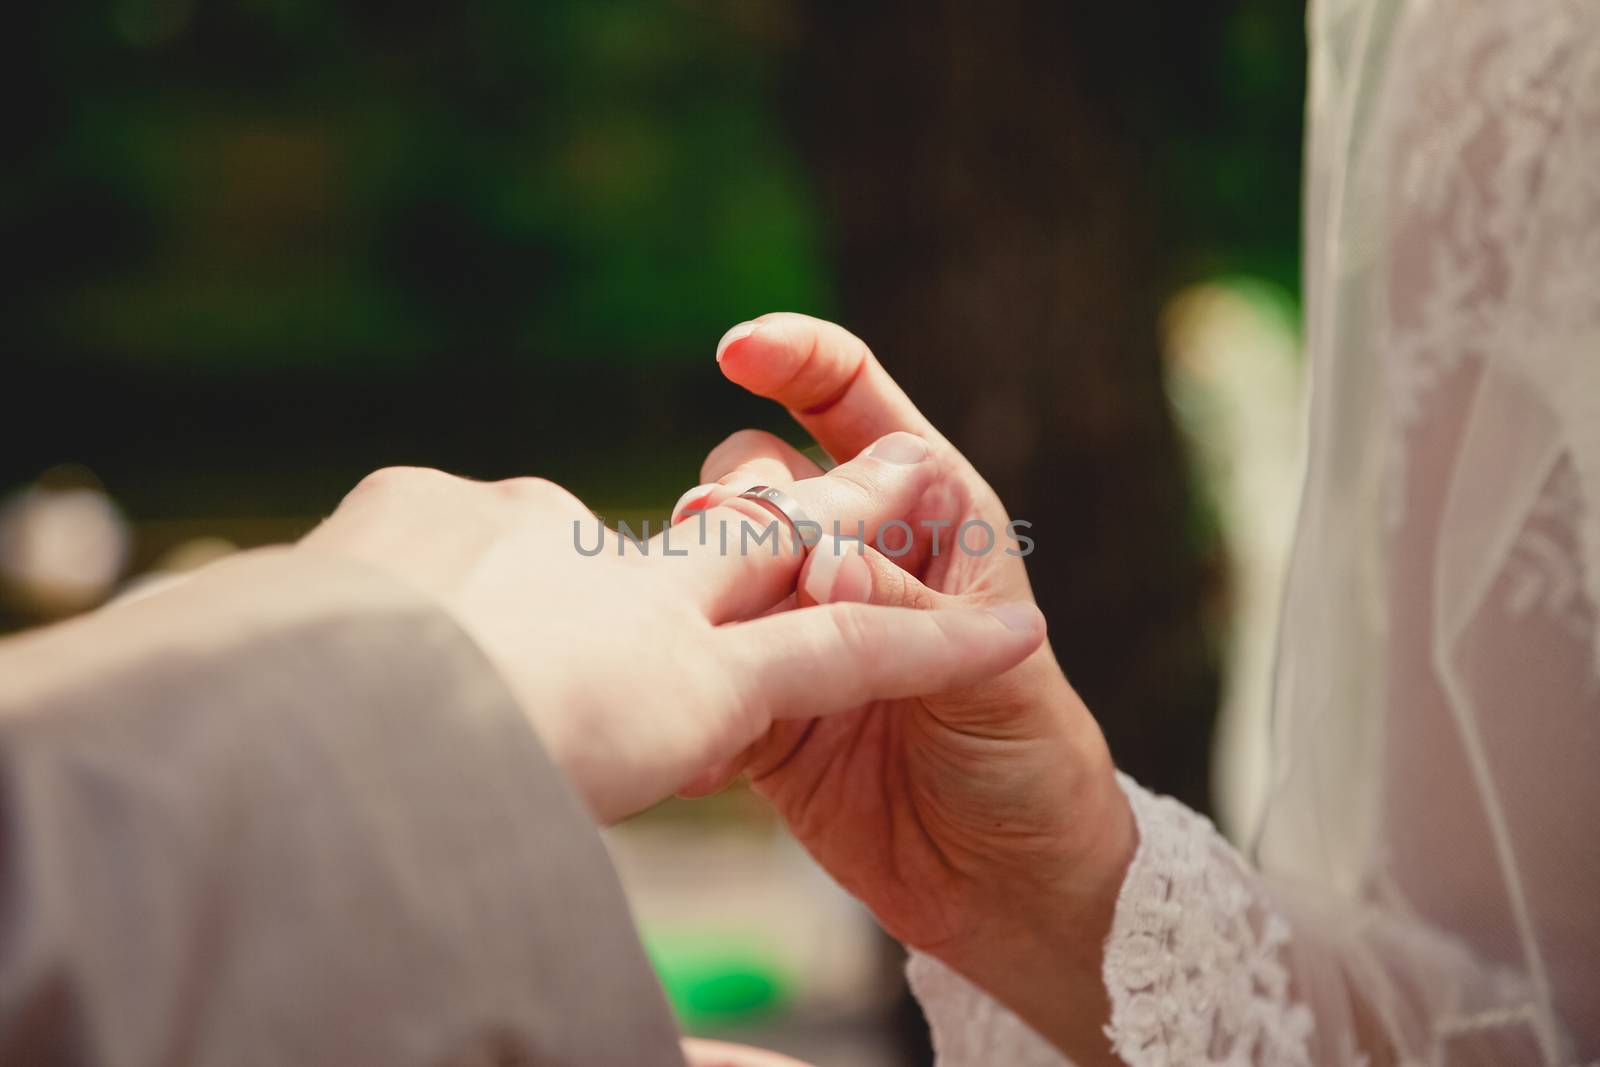 groom hand putting a wedding ring on the brides finger